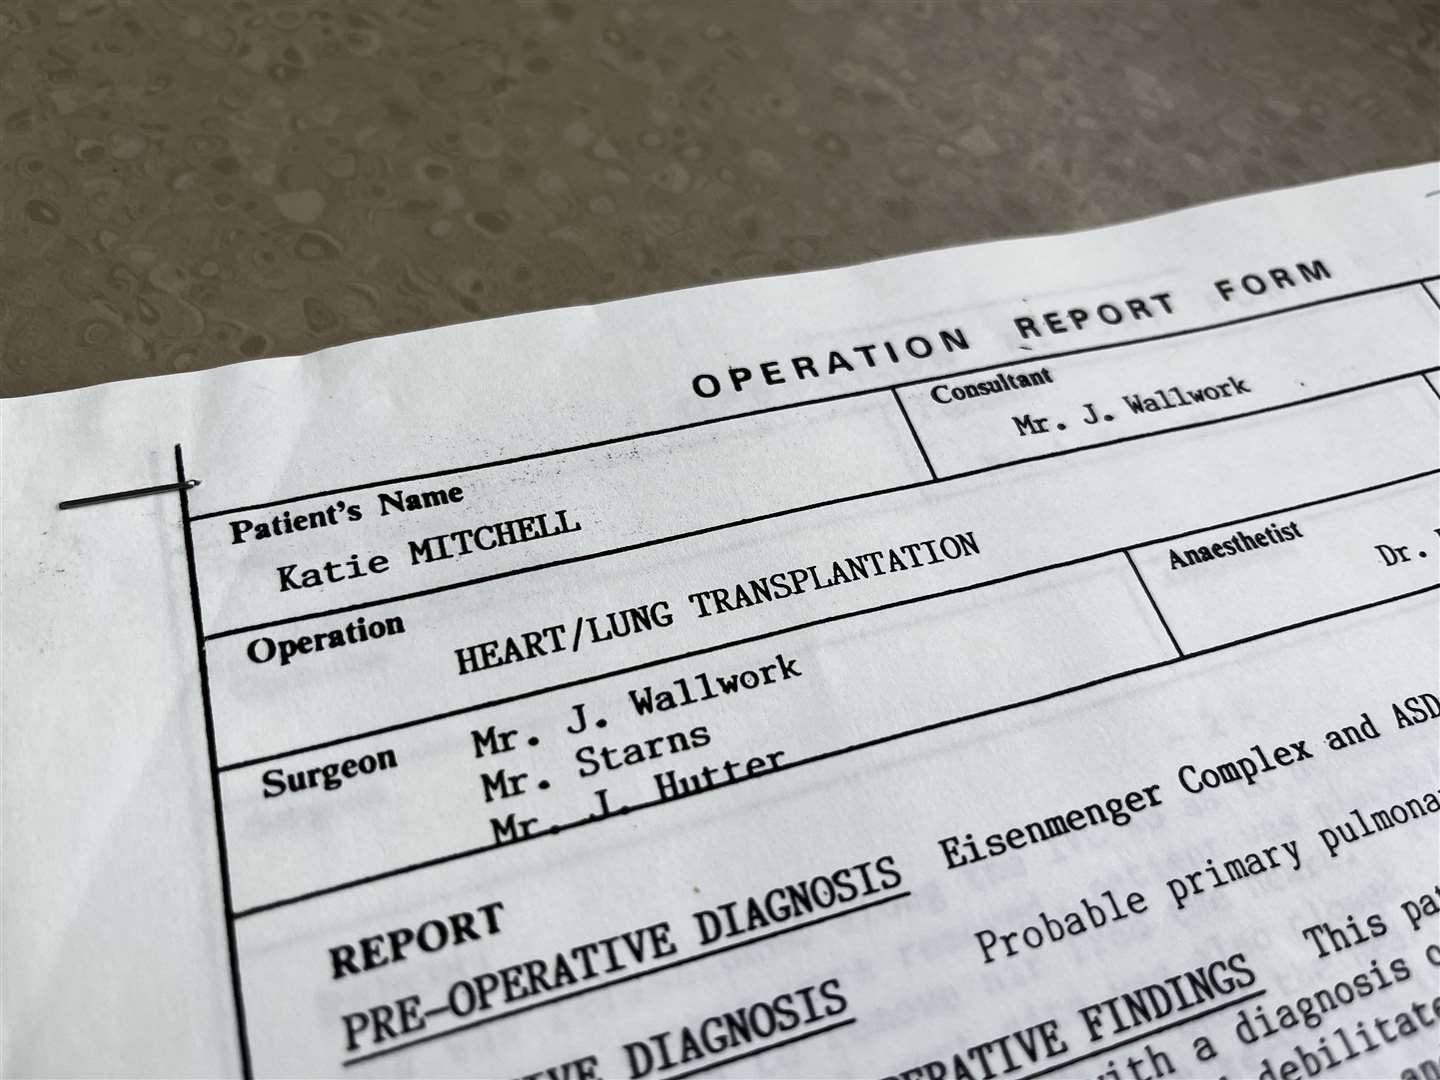 Katie's operation report form, in 1987